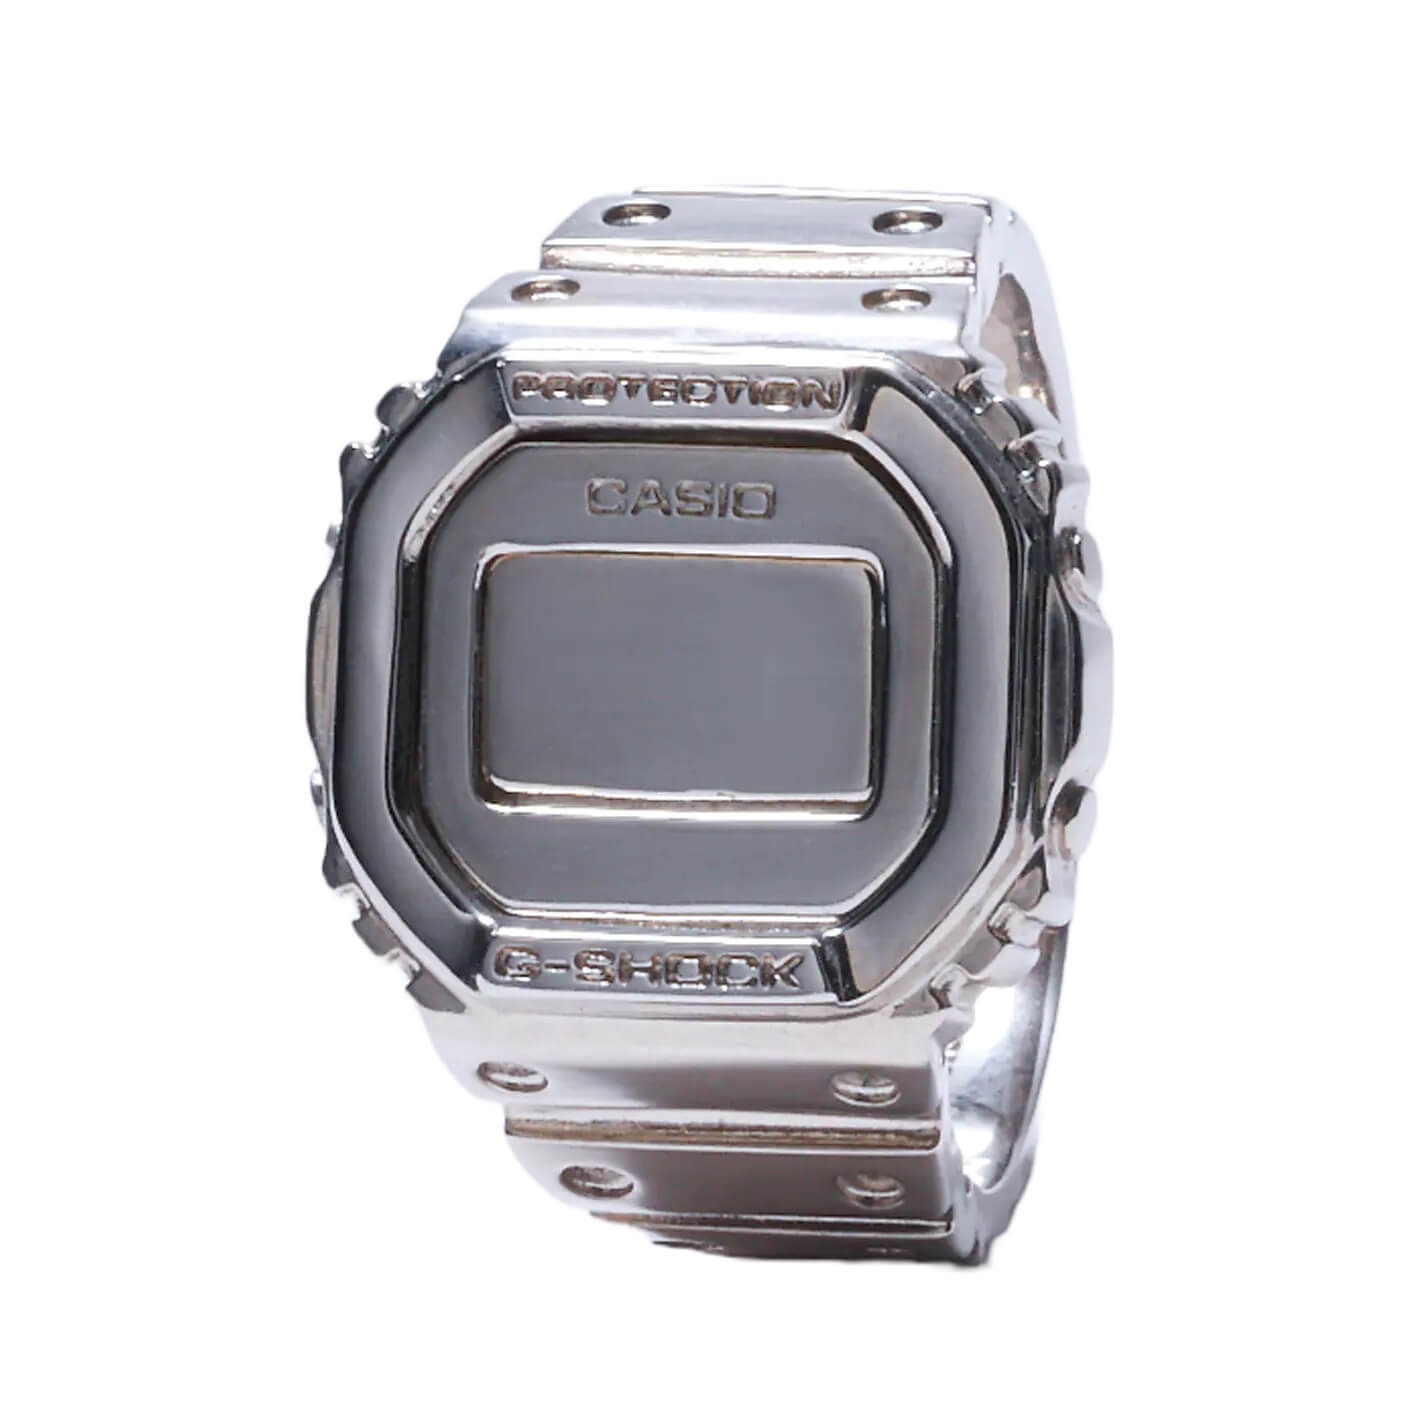 G-Shock Products to release DW-5600 Type Silver Ring